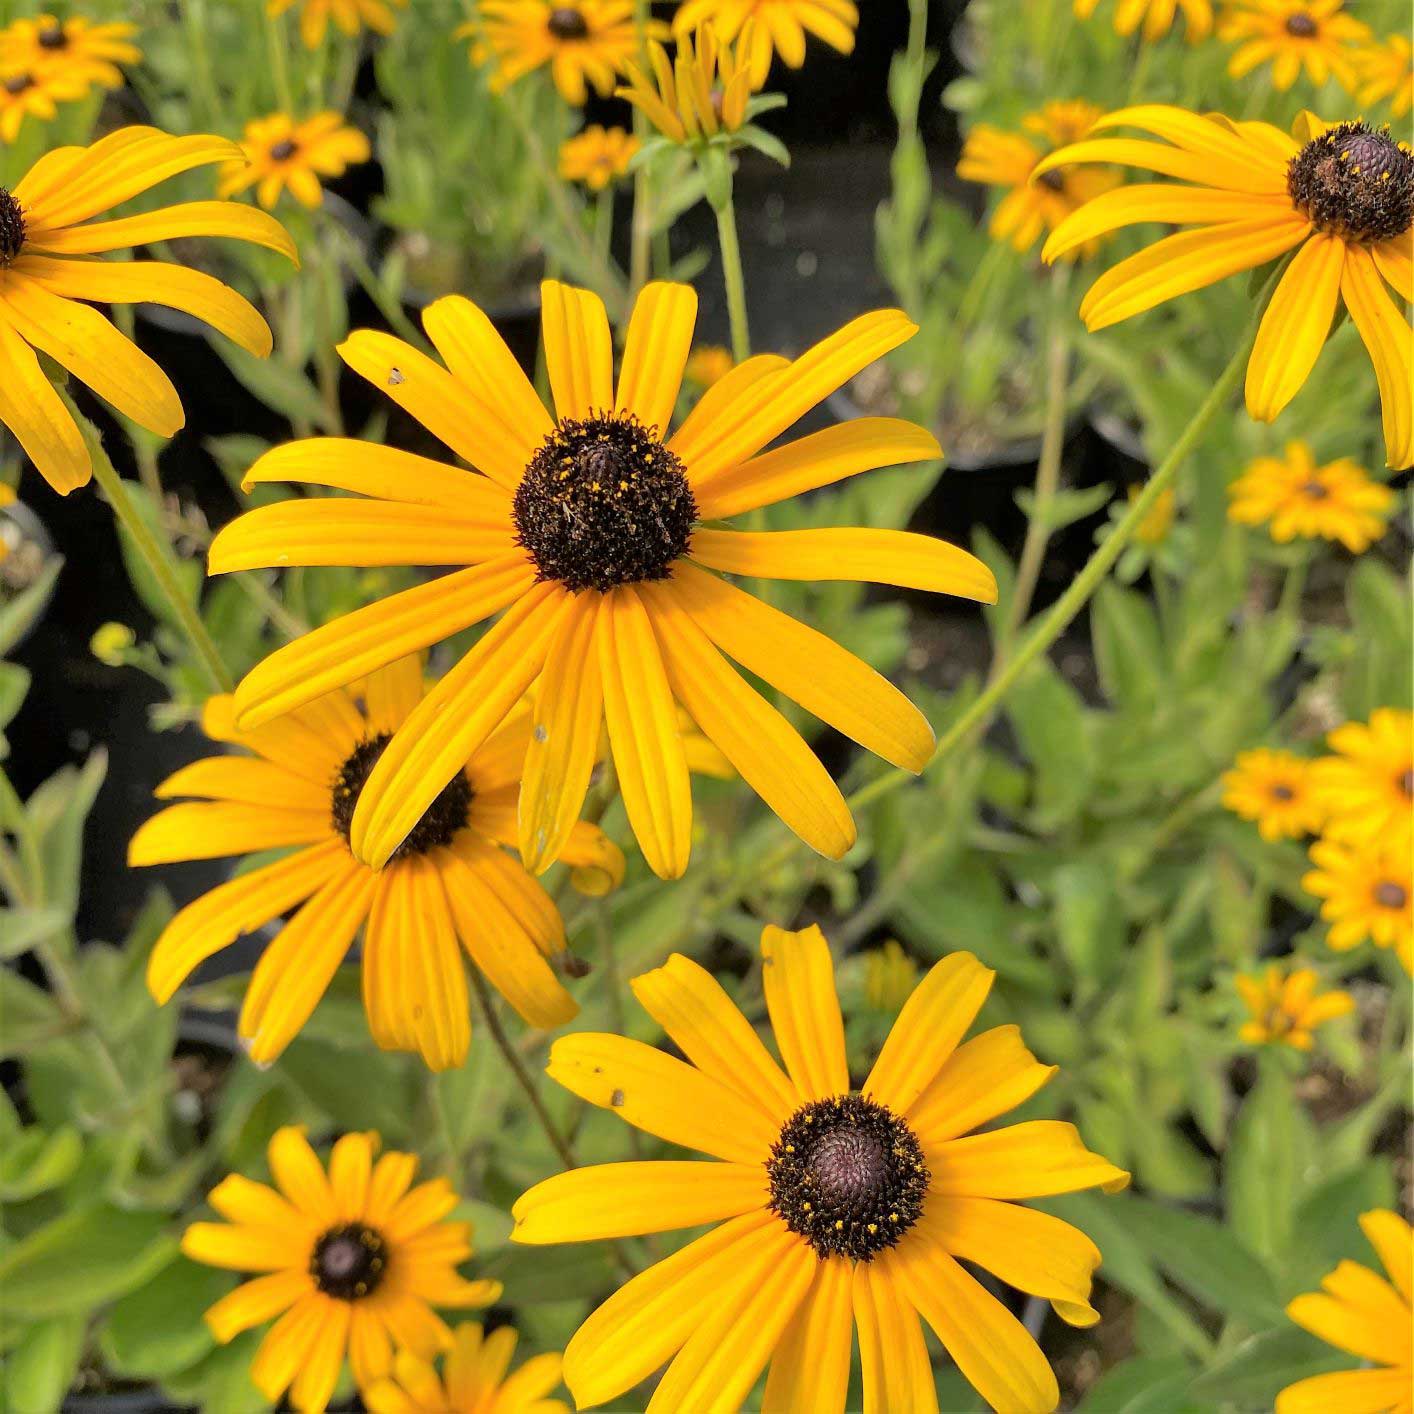 Striking summer flowers are beloved for their golden orange rays and chocolate brown cones. Butterflies flock to the blooms and songbirds relish the seeds in sunny sites with average soil.